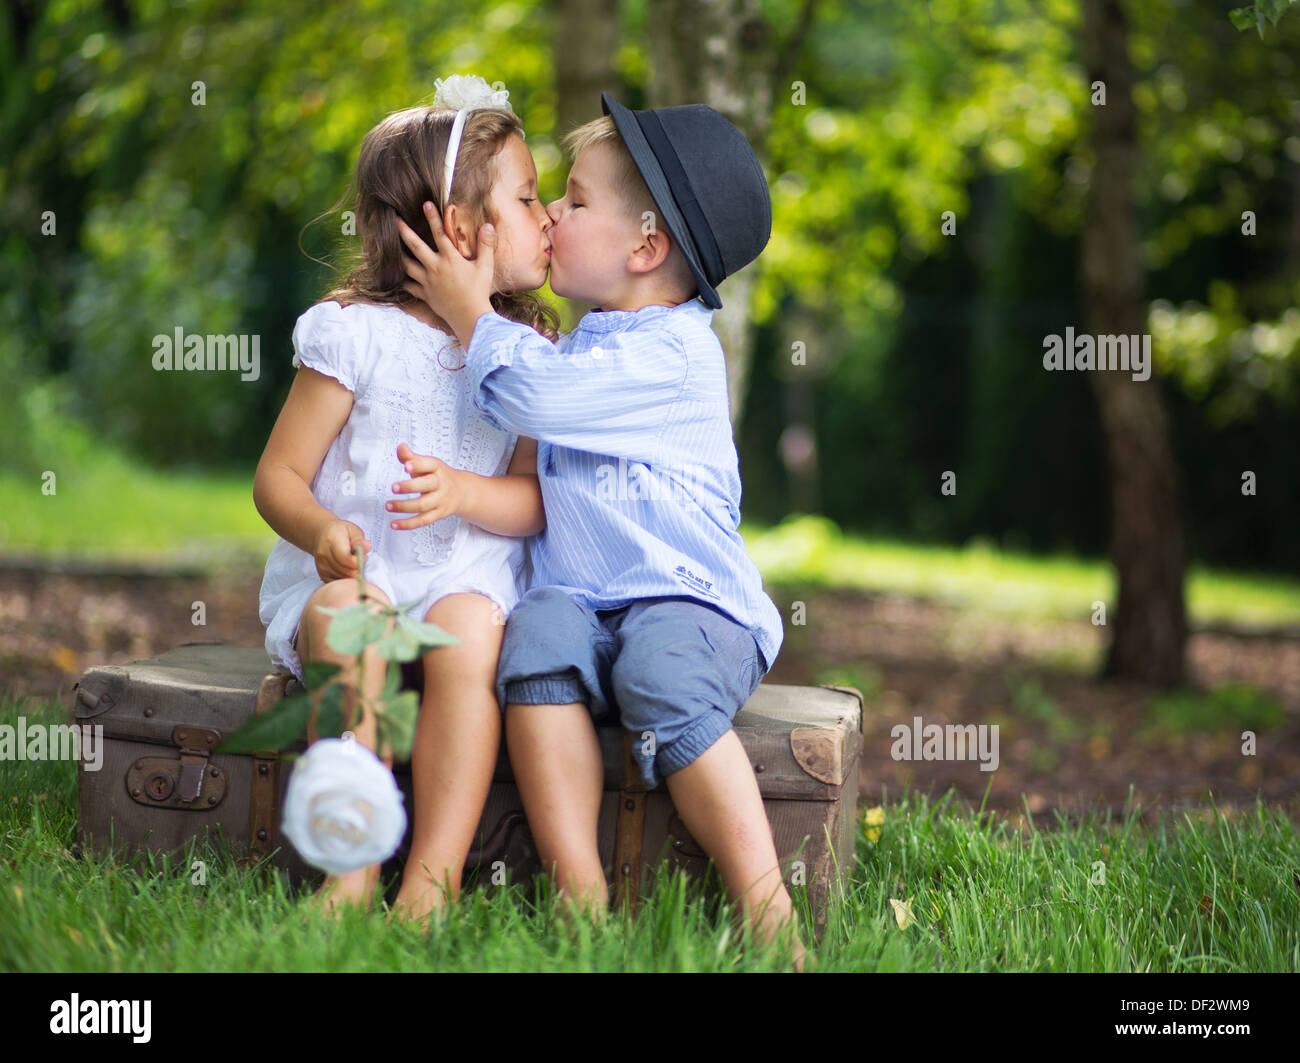 Cute couple of kids kissing each other Stock Photo - Alamy